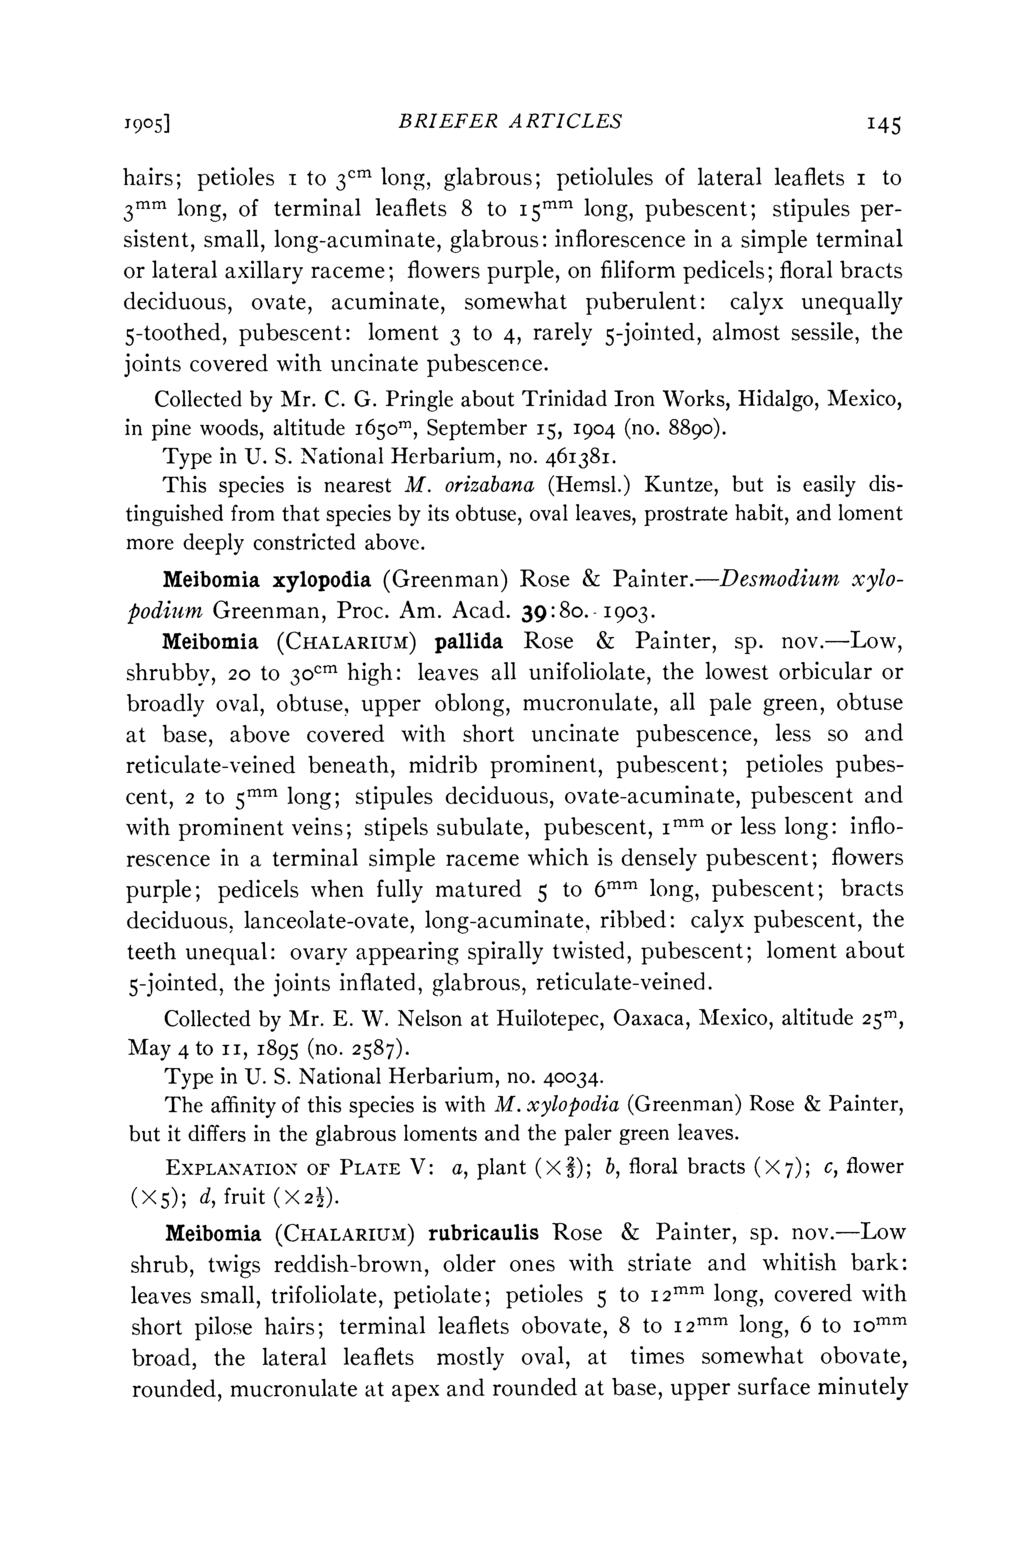 1905] BRIEFER ARTICLES I45 hairs; petioles I to 3cm long, glabrous; petiolules of lateral leaflets i to 3mm long, of terminal leaflets 8 to I5mm long, pubescent; stipules persistent, small,